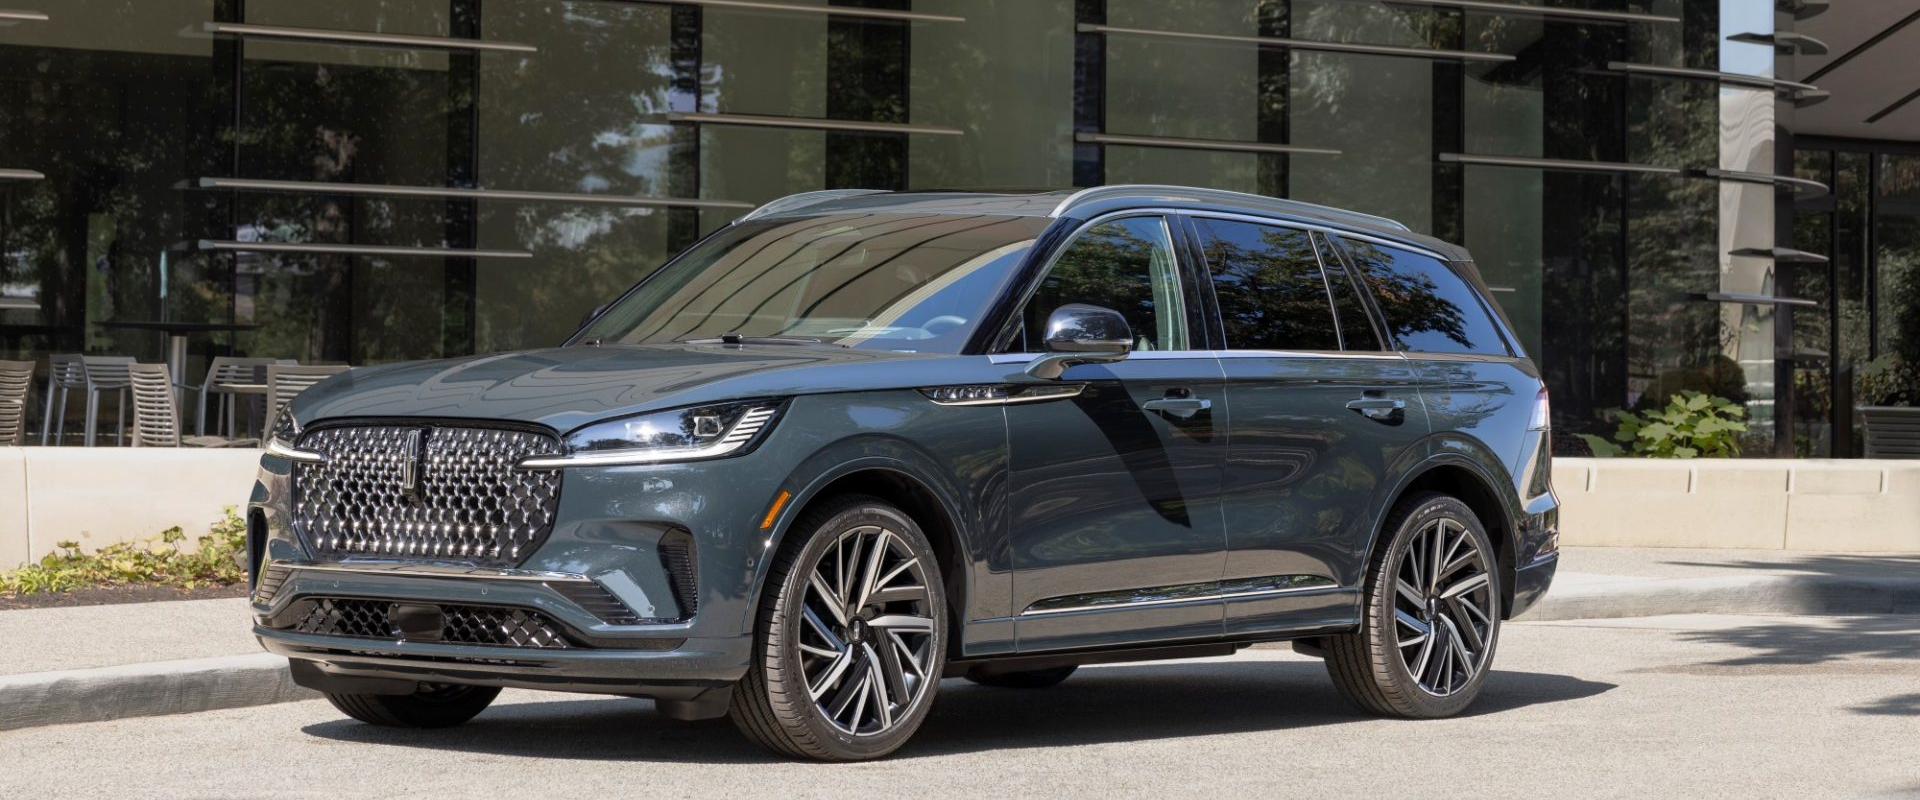 Lincoln Aviator Refresh Brings More Tech and BlueCruise Hands-Free Driving